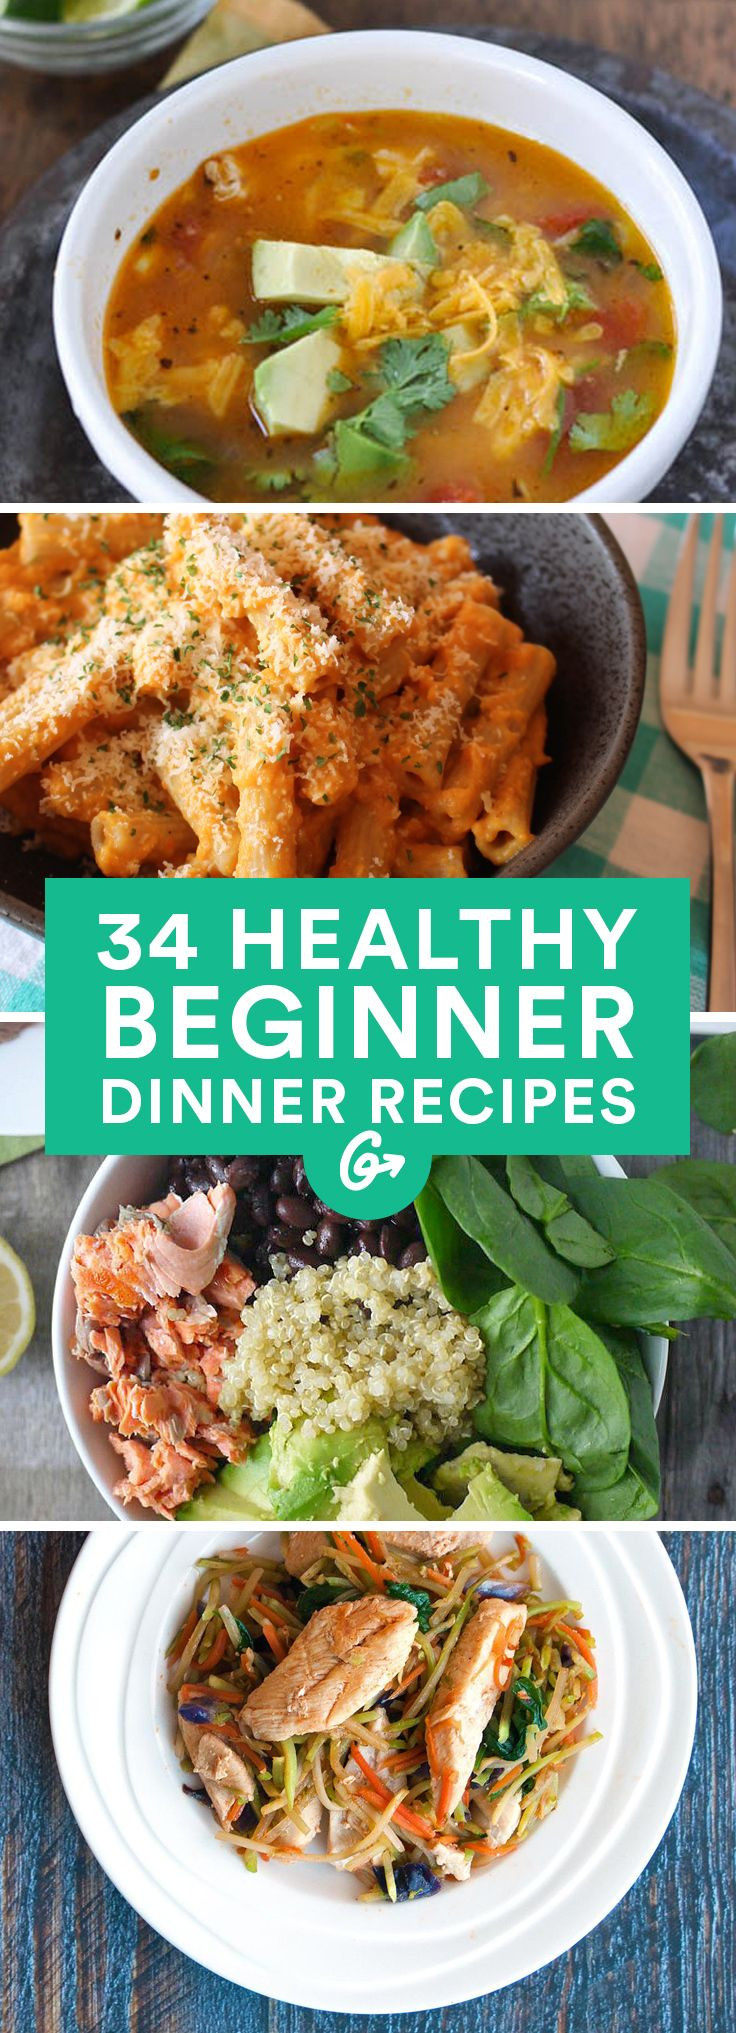 Easy Dinner Recipes For Beginners
 34 Healthy Dinner Recipes Anyone Can Make